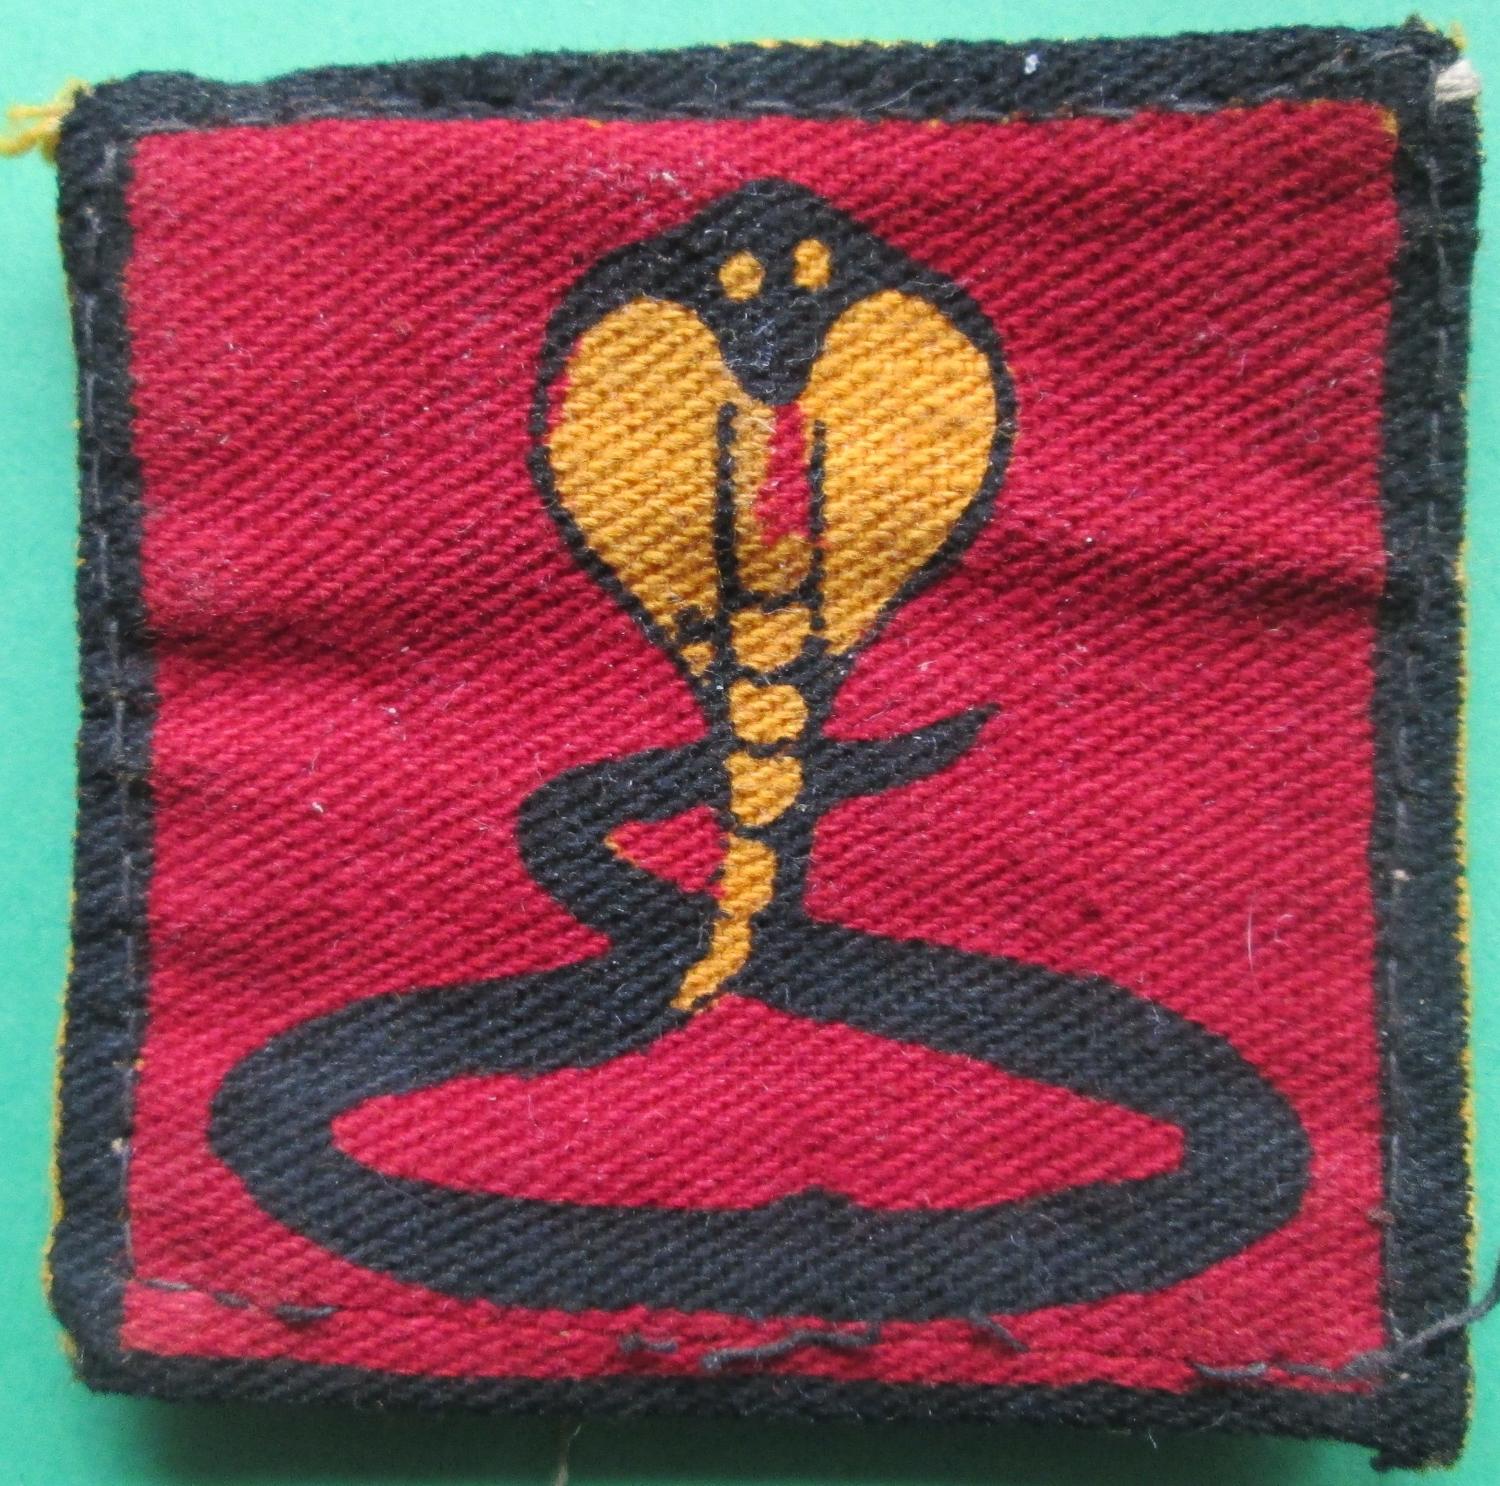 A WWII NAGPUR DISTRICT FORMATION PATCH